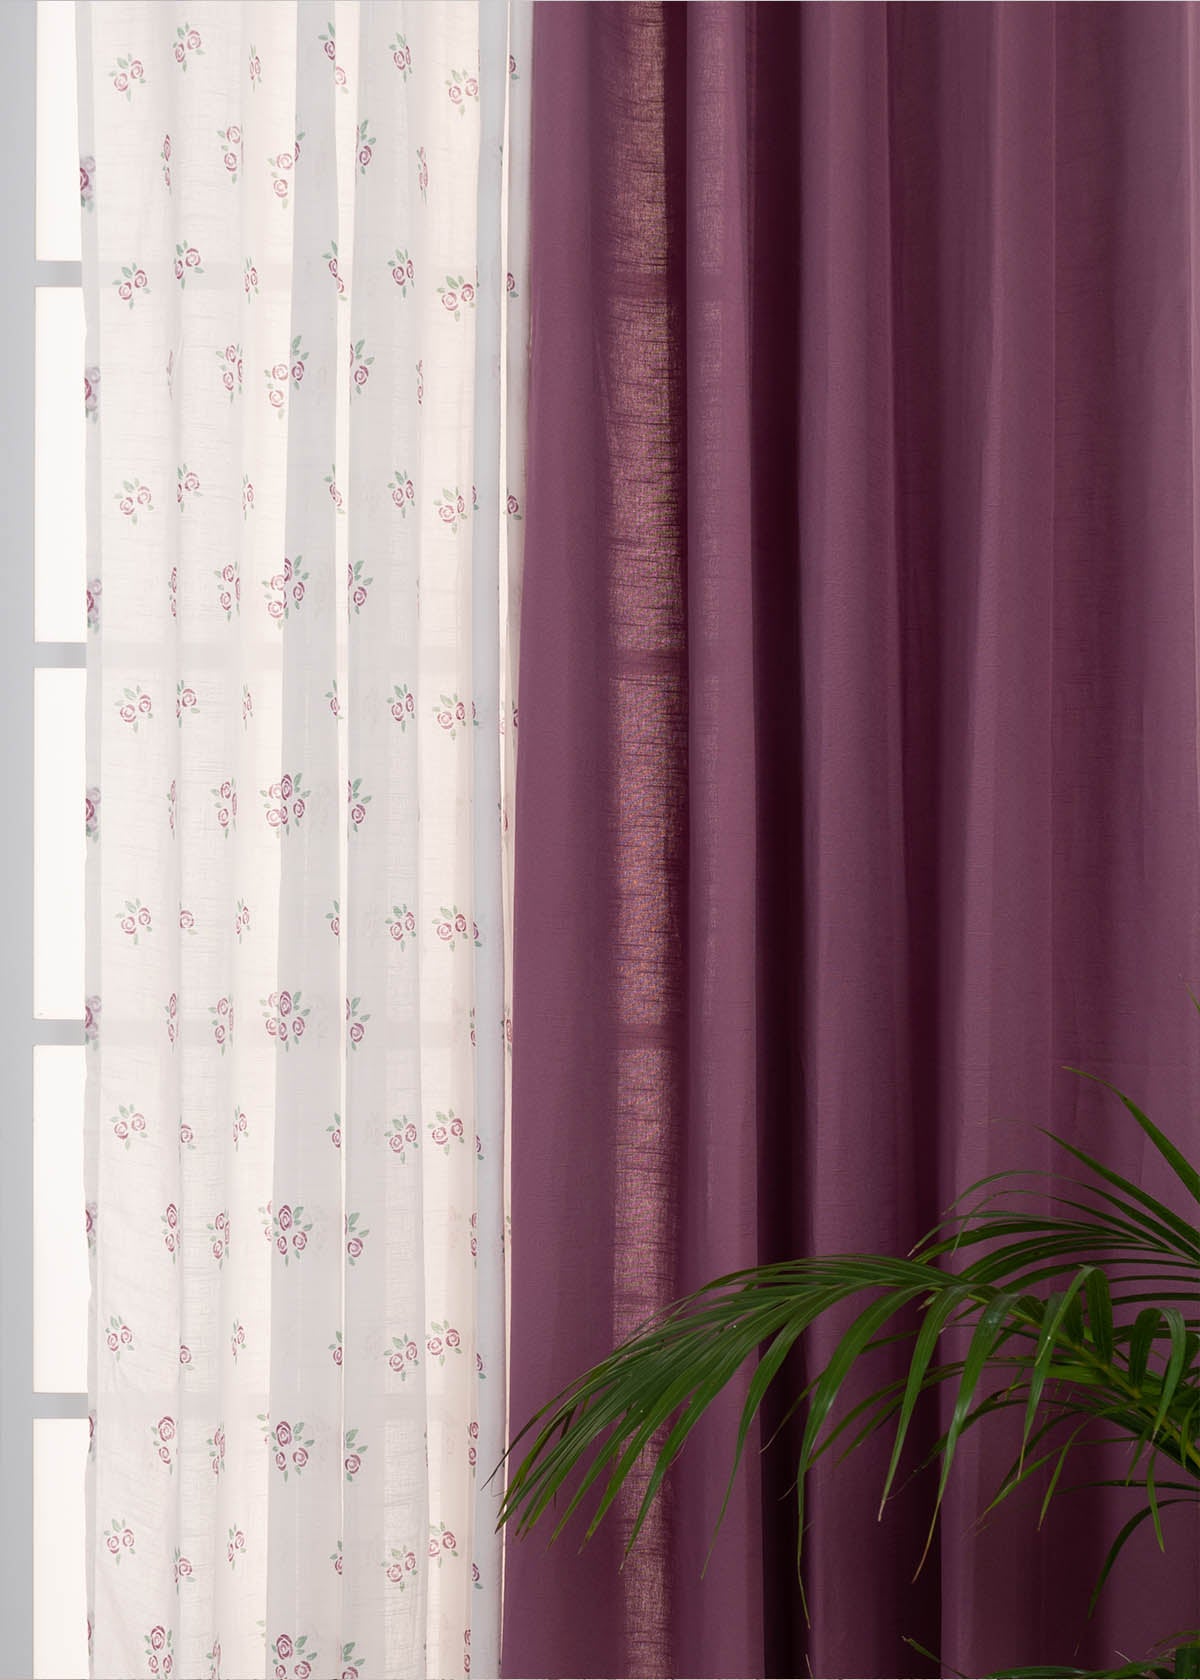 Grape Solid, Rose Garden Sheer Set Of 2 Combo Cotton Curtain - Lavender